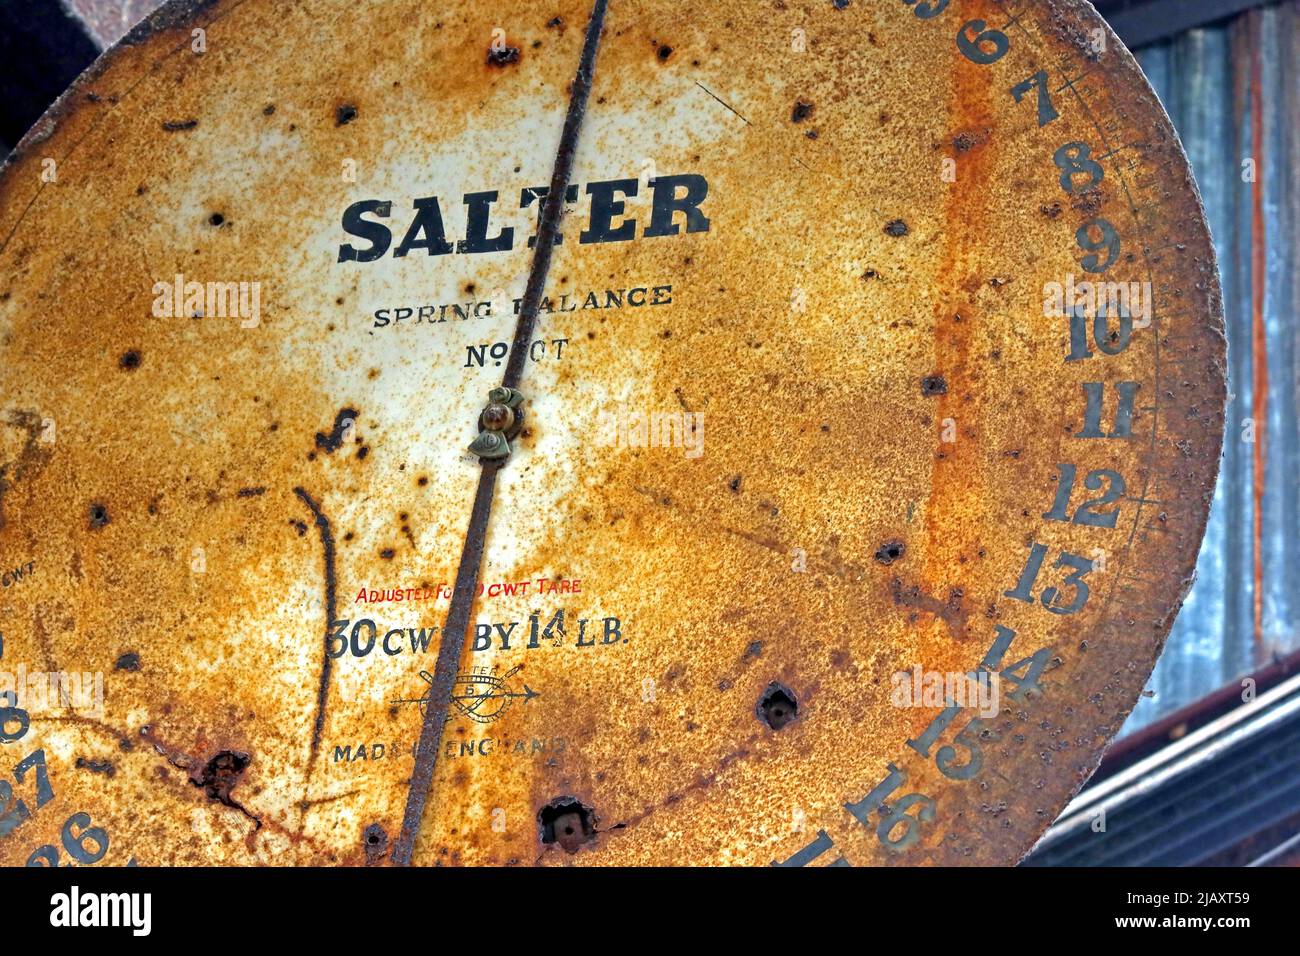 Rusty Salter spring balance scale, 30 cwt by 14lb Stock Photo